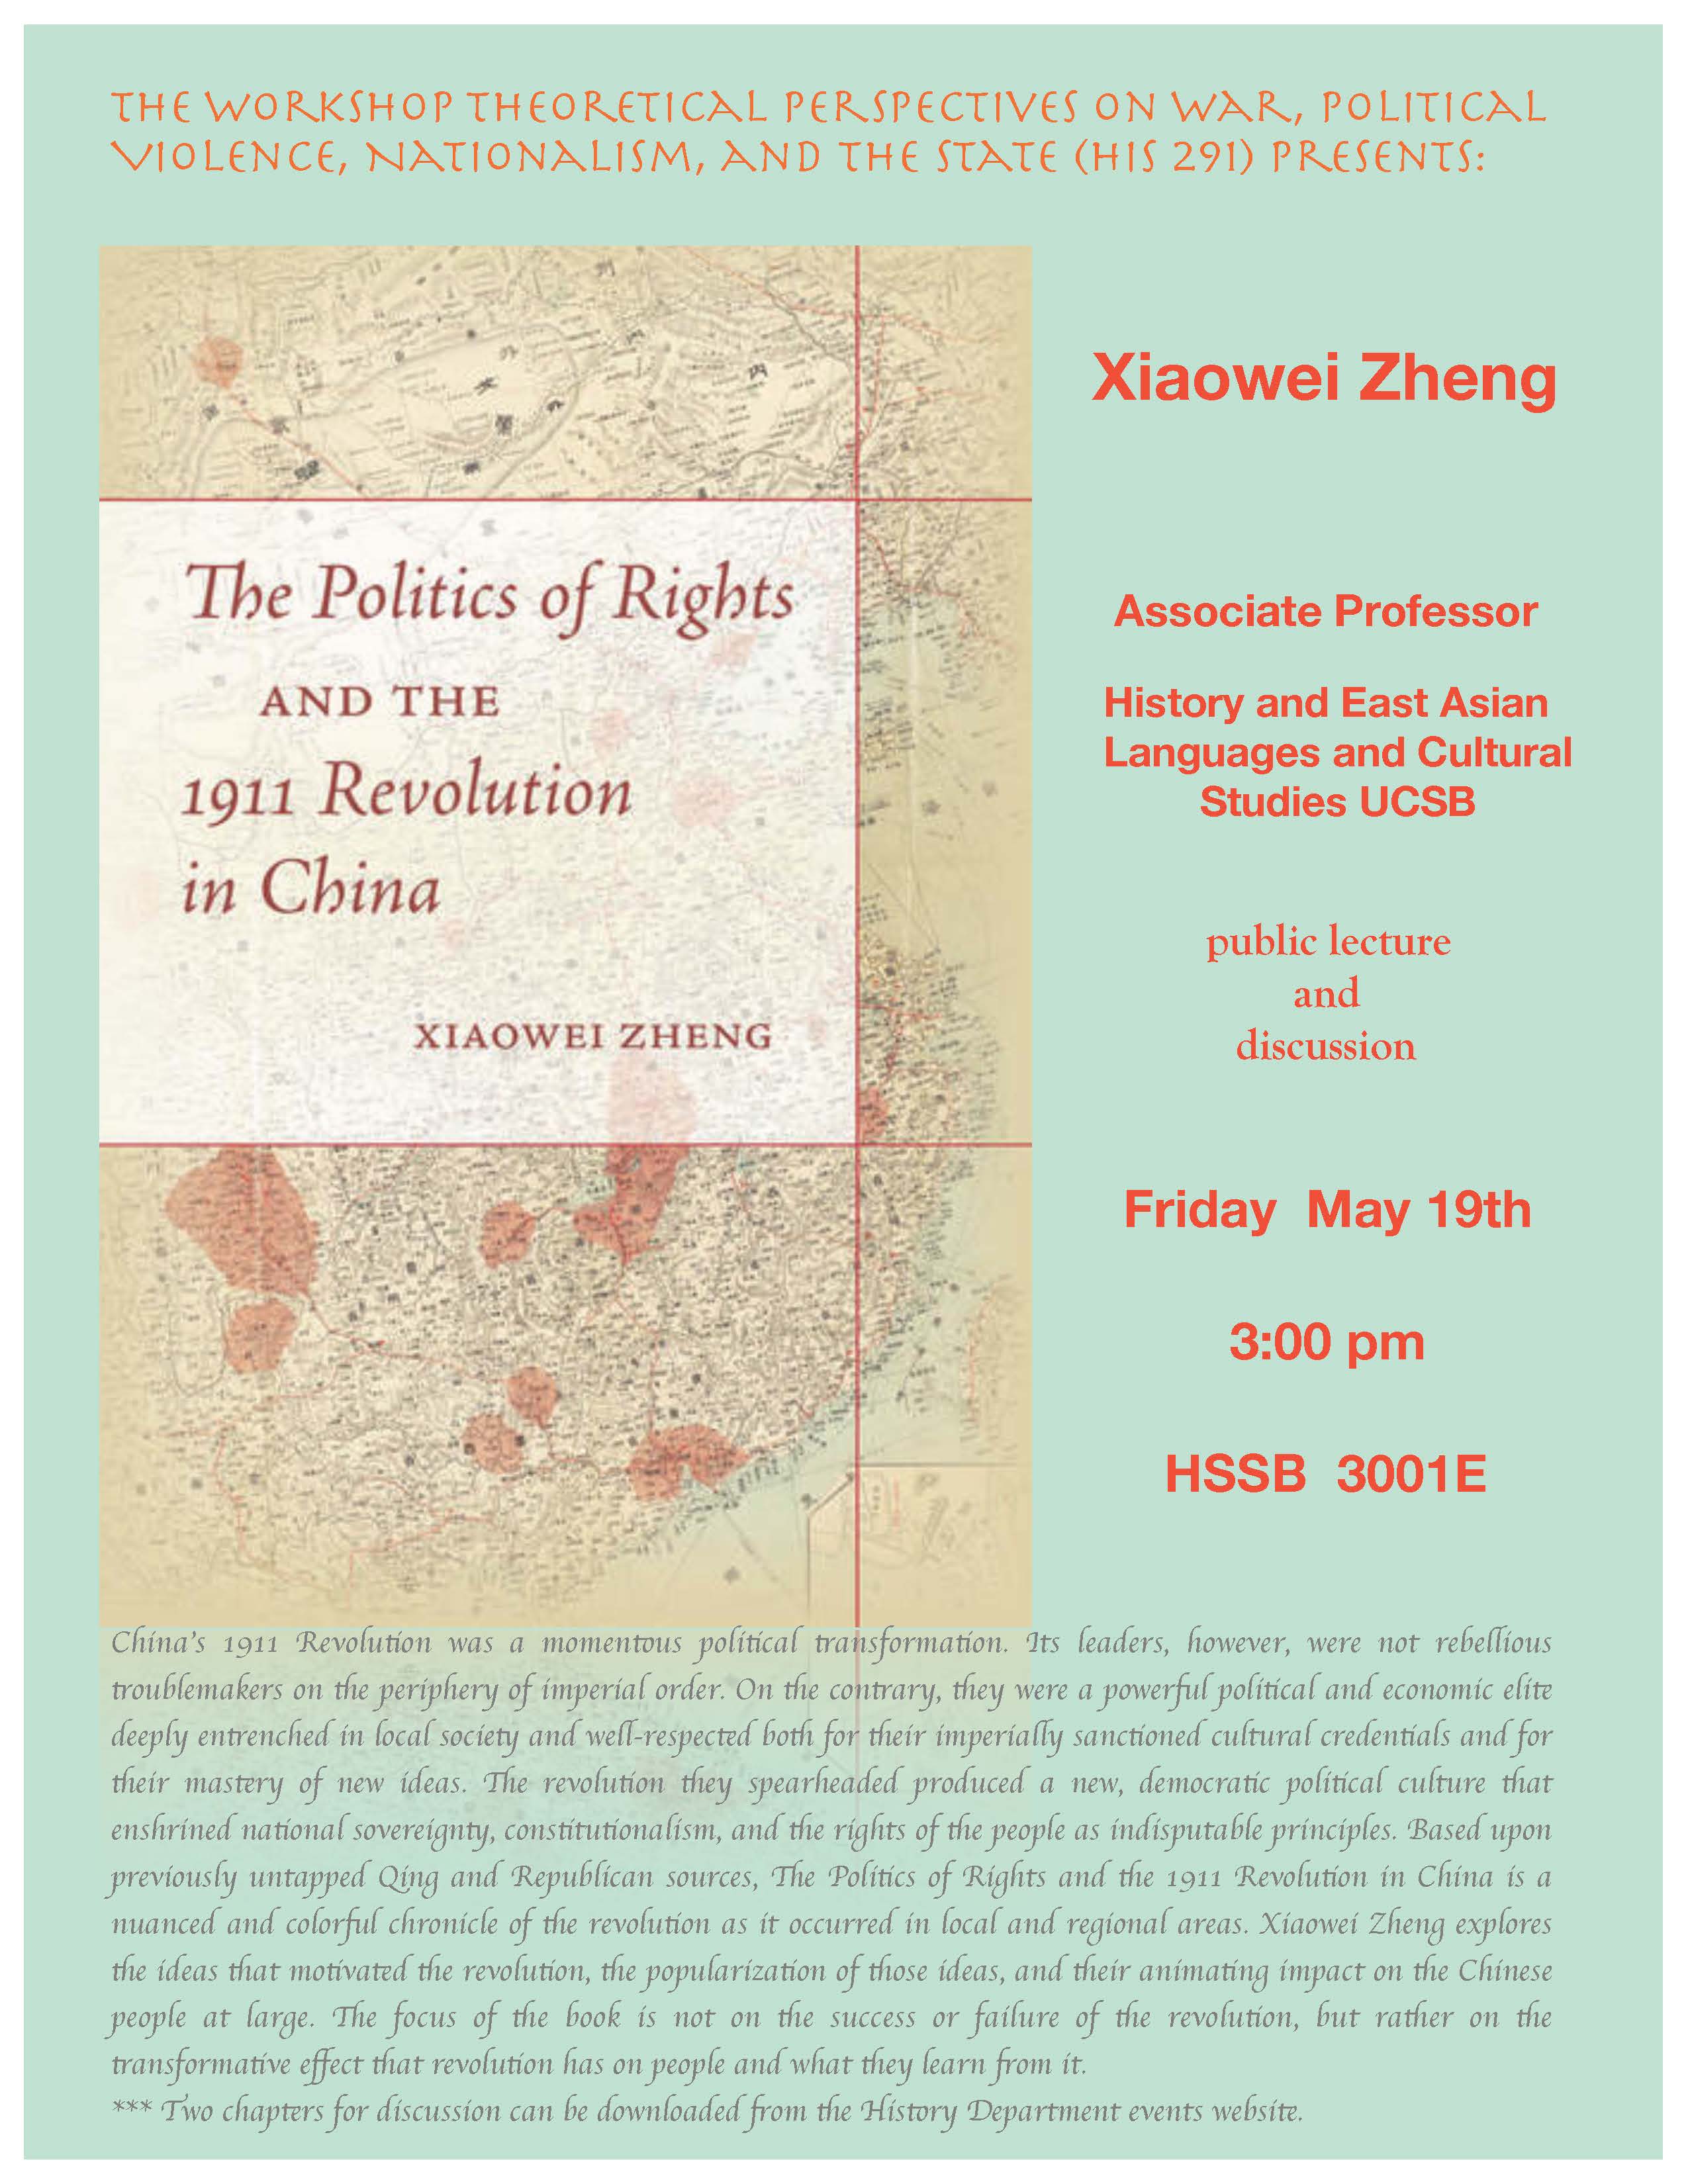 flyer for The Politics of Rights and The 1911 Revolution in China, a talk by Xiaowei Zheng